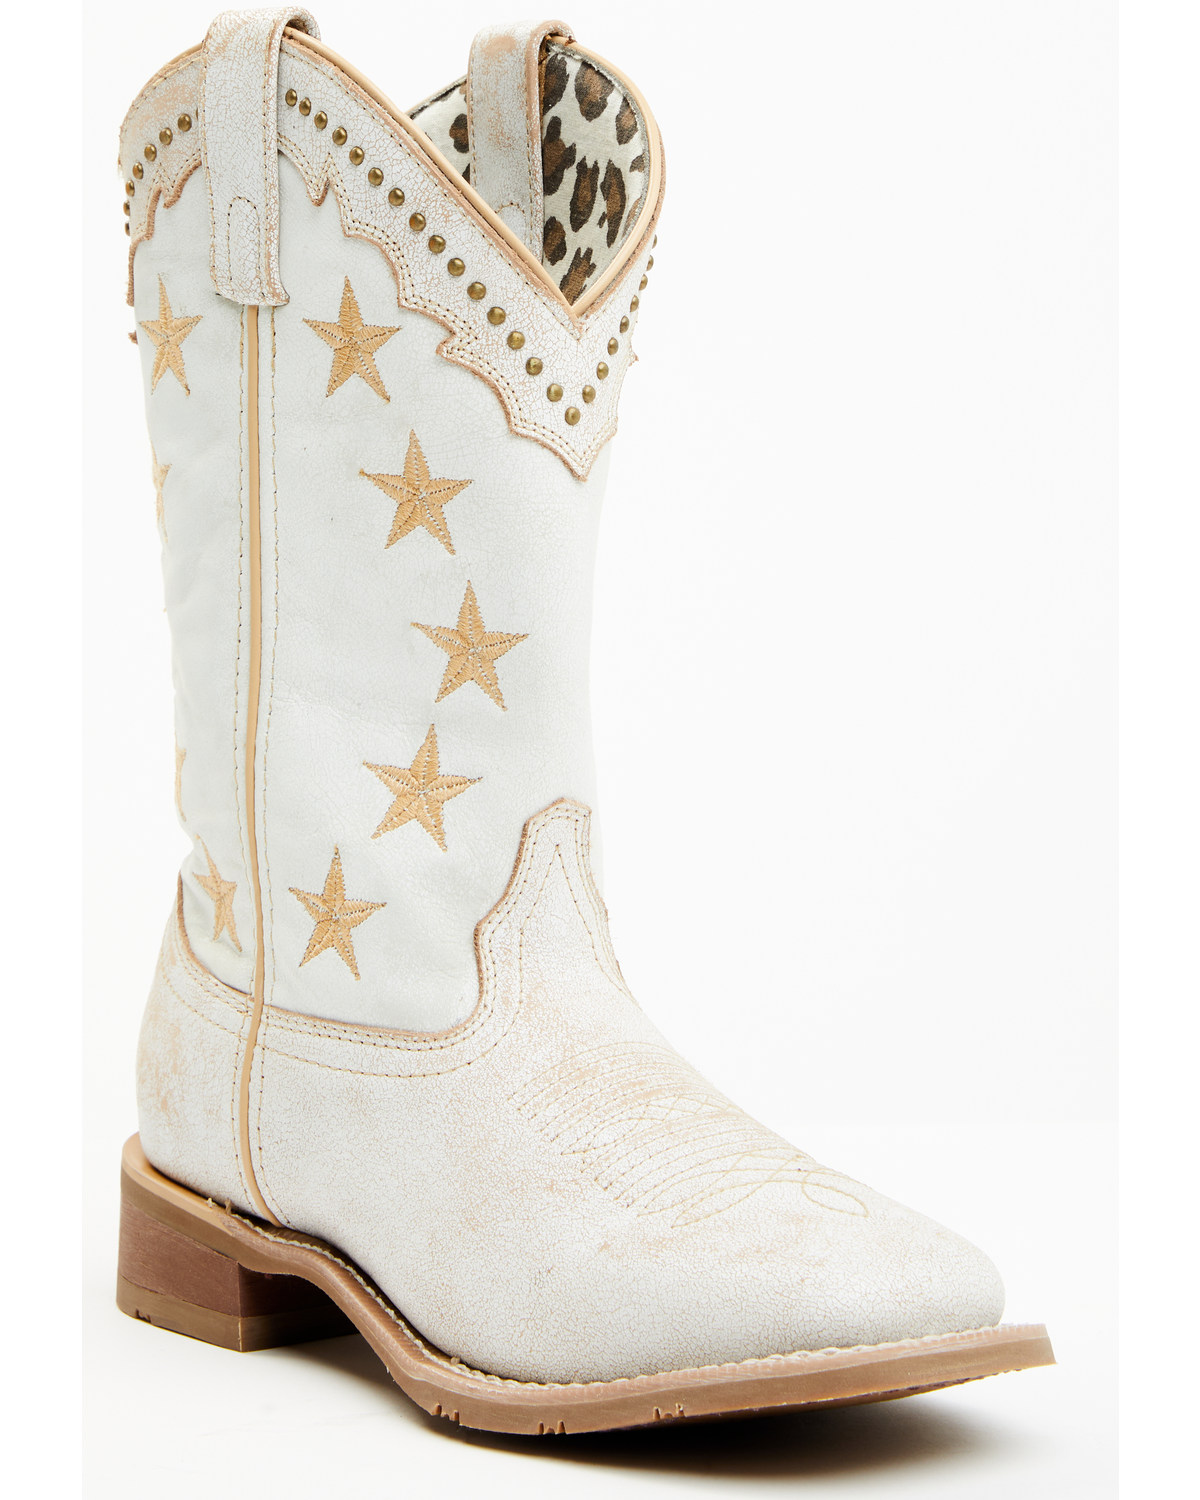 Laredo Women's Early Star 11" Studded Western Performance Boots - Broad Square Toe